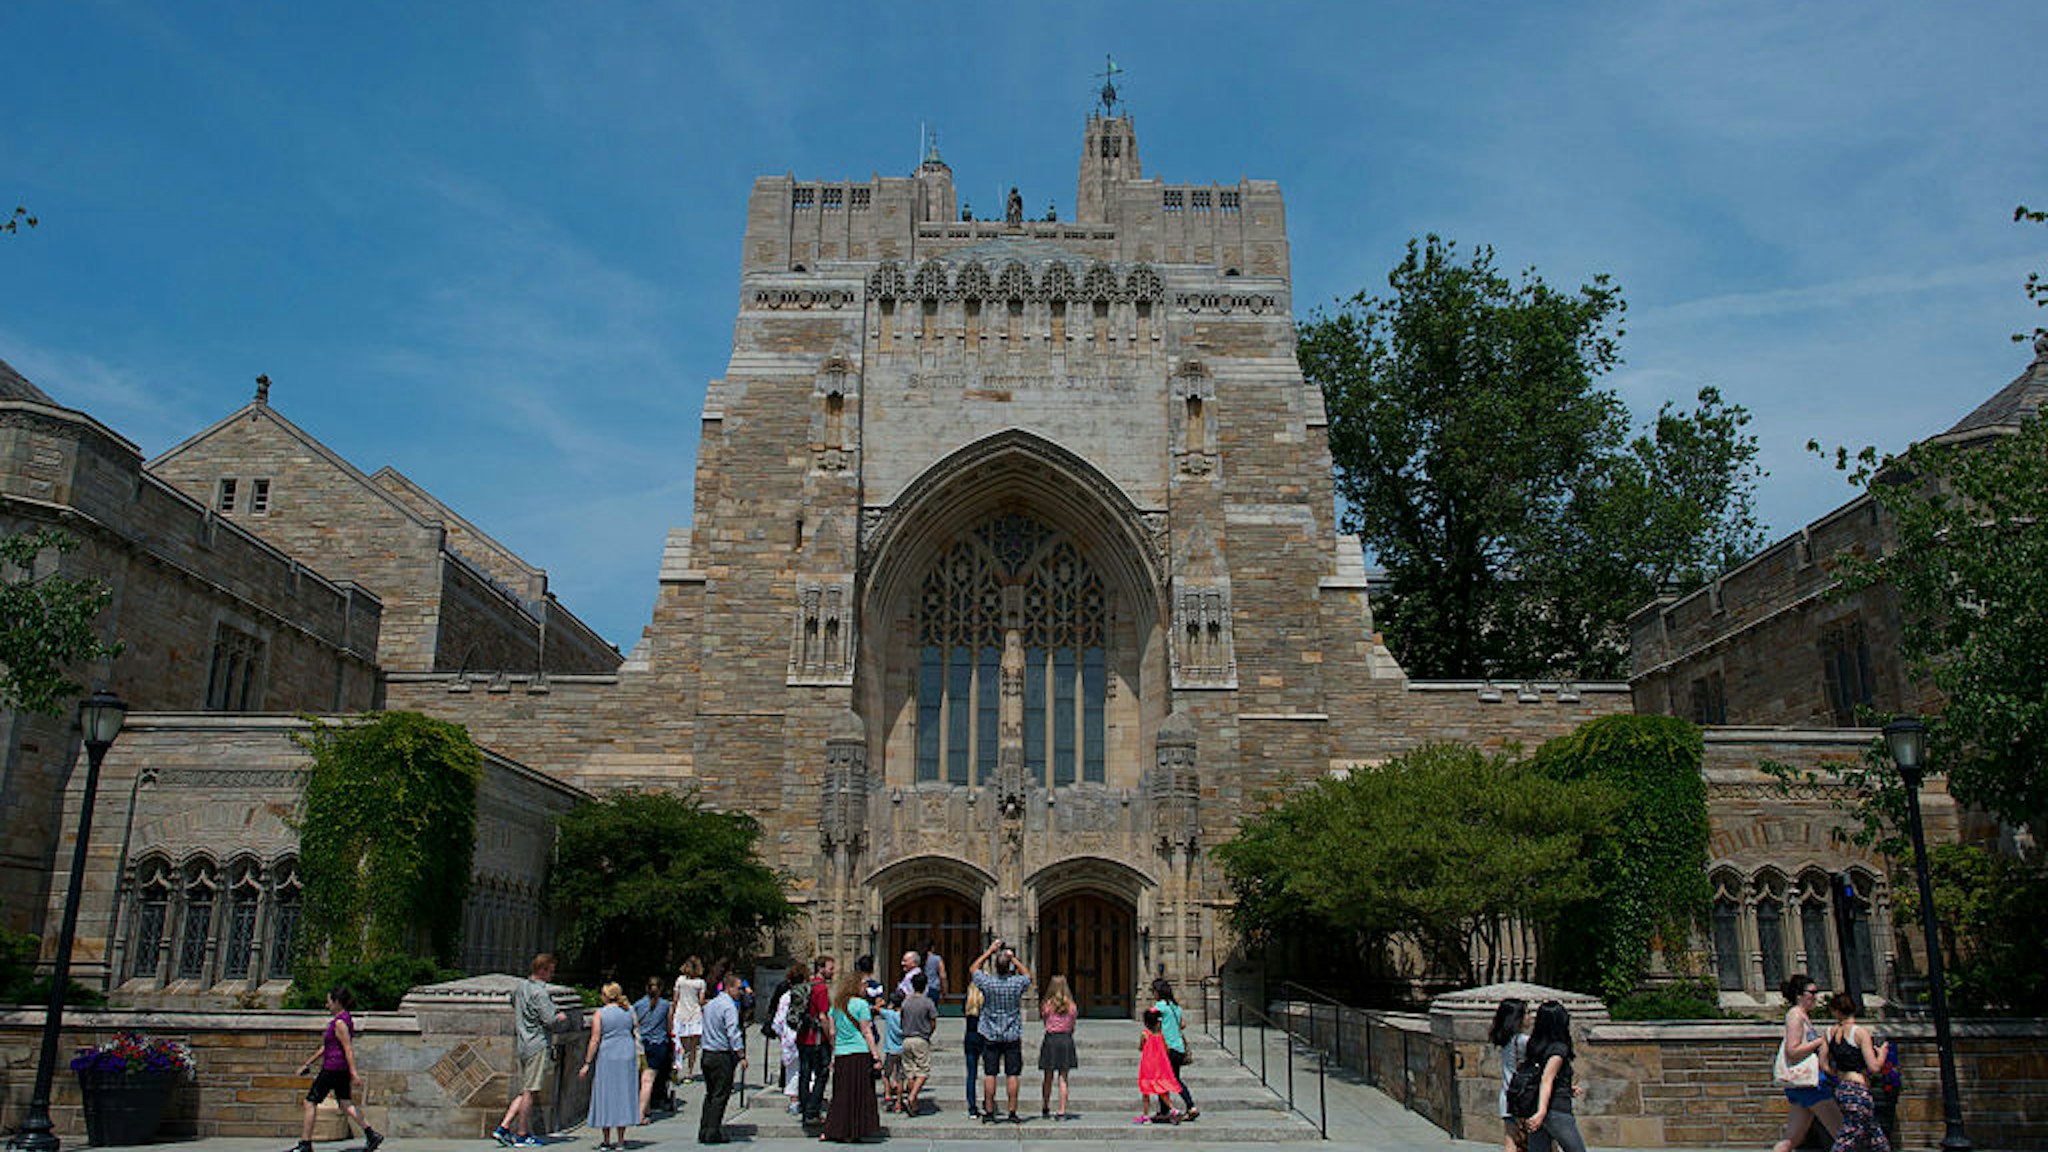 A tour group makes a stop at the Sterling Memorial Library on the Yale University campus in New Haven, Connecticut, U.S., on Friday, June 12, 2015.